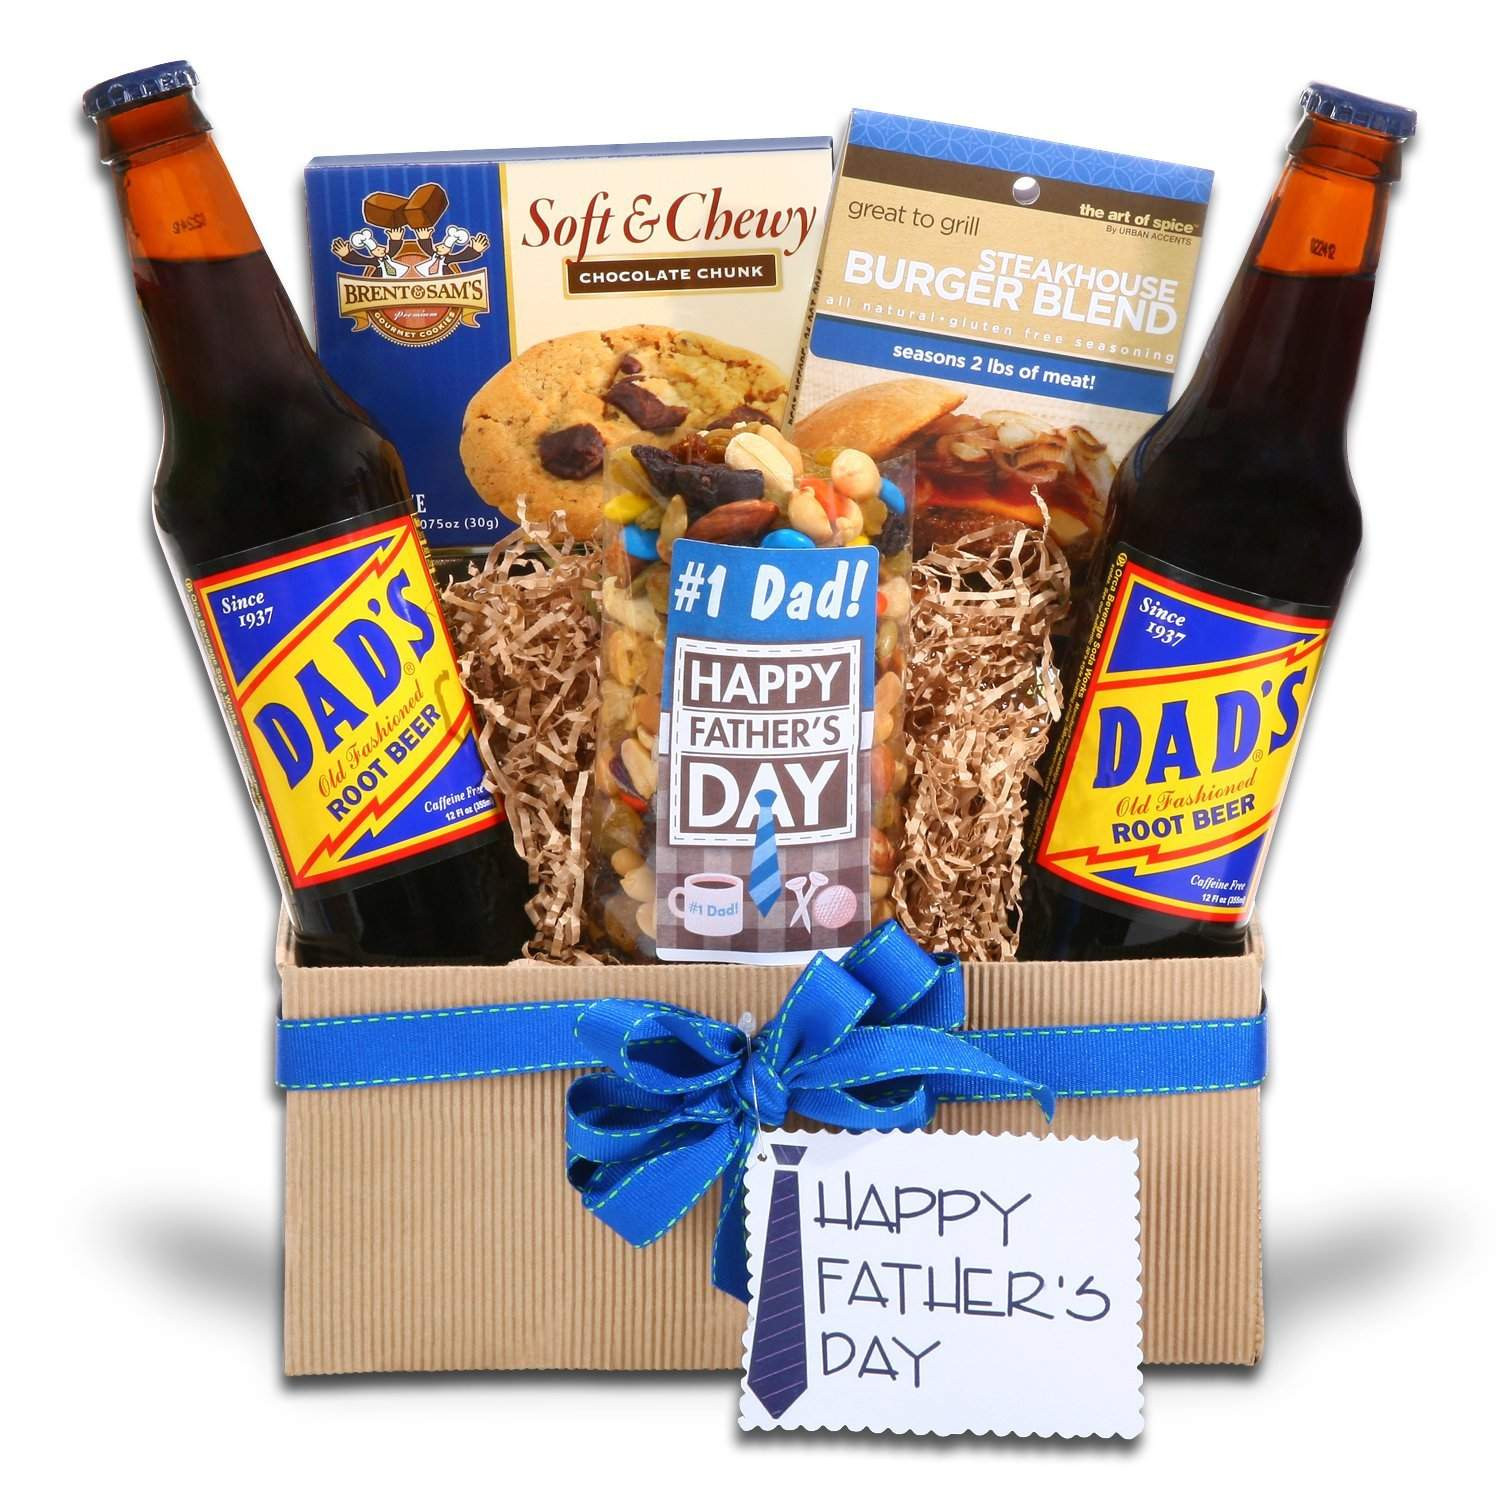 Gift Basket Ideas For Dads
 Top 20 Best Father’s Day Gifts The Heavy Power List